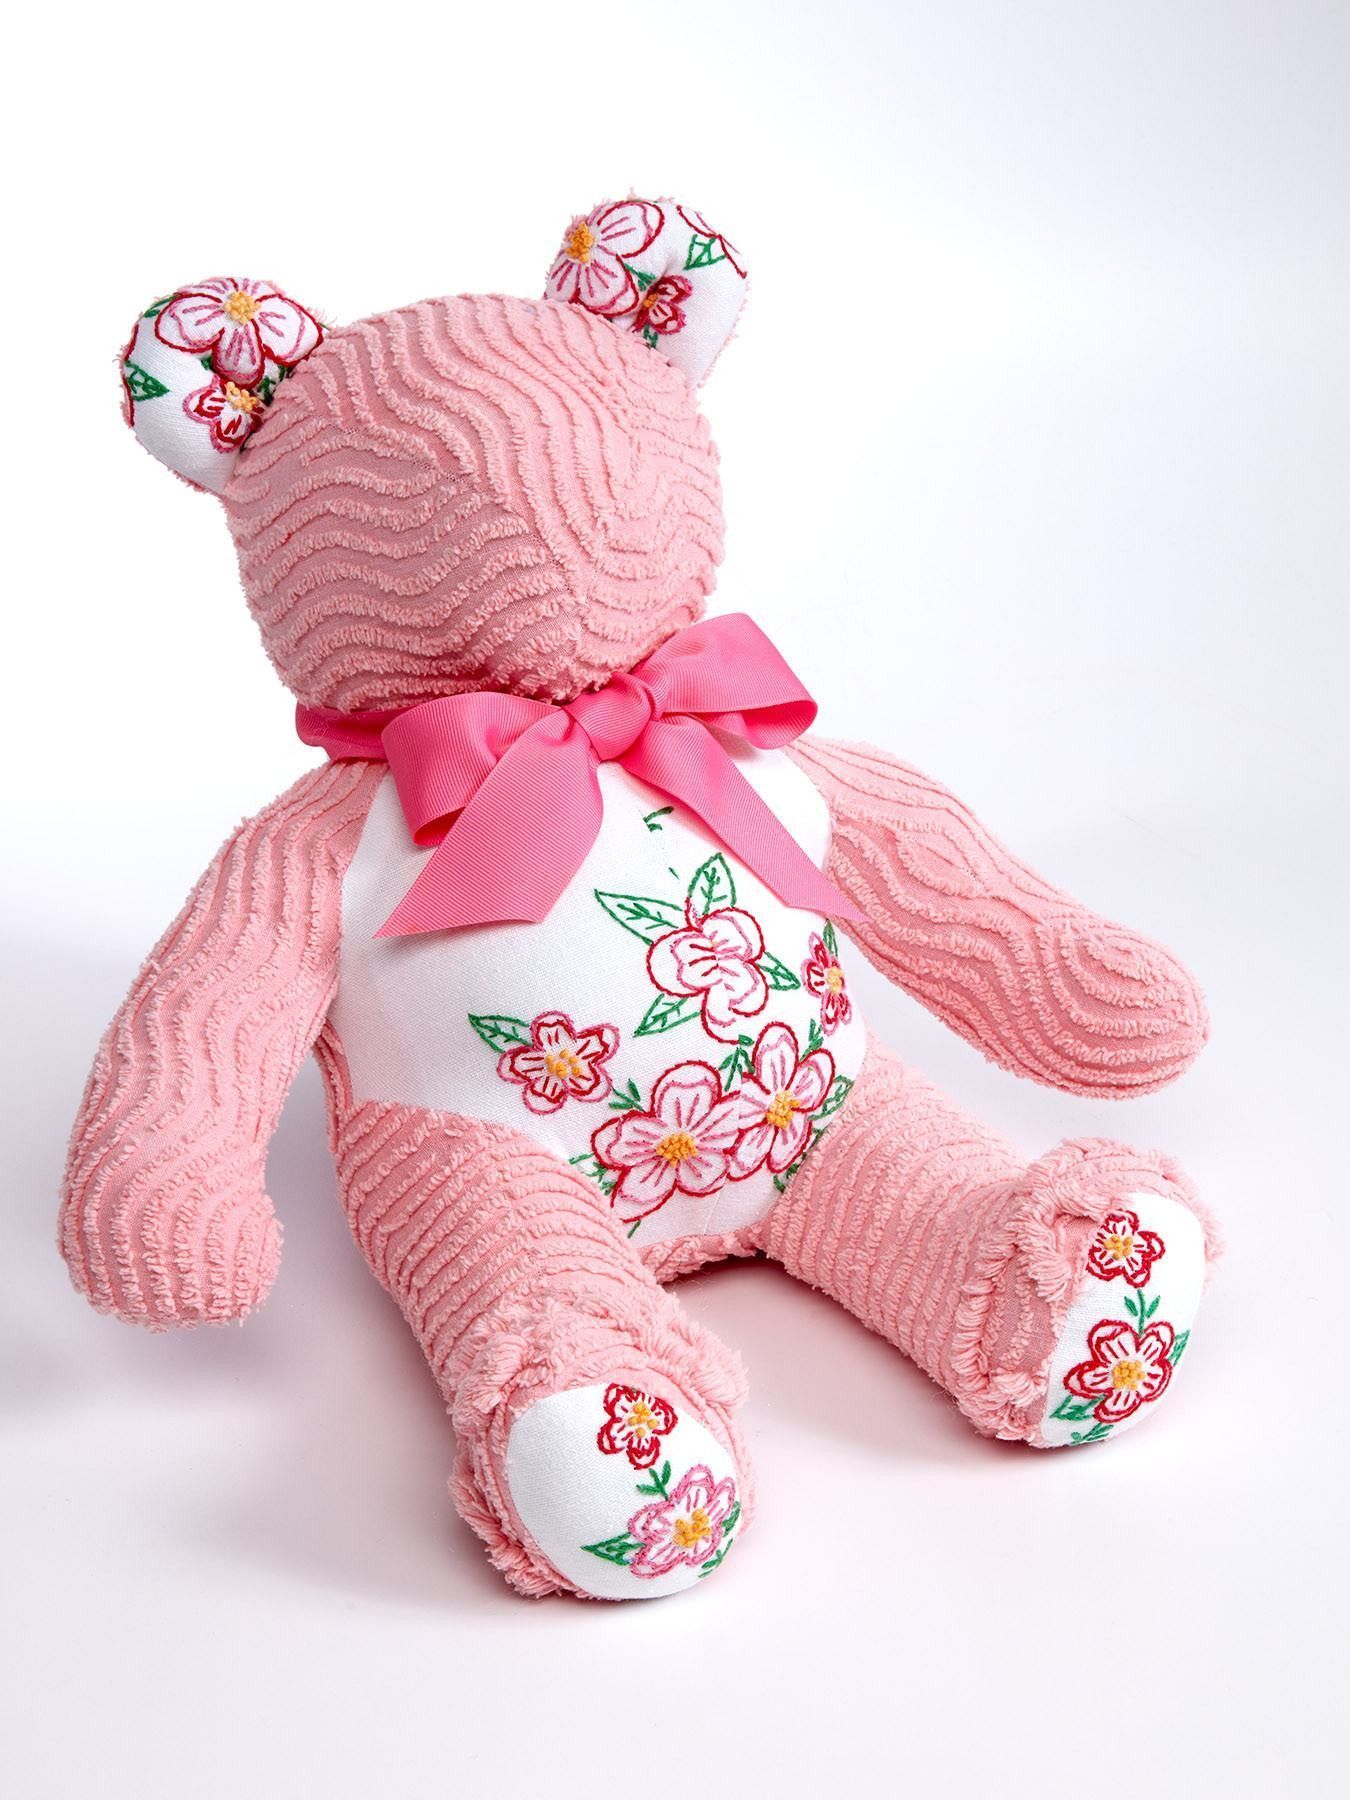 Snuggle Up Pink and Floral Chenille Teddy Bear -   25 crafts gifts teddy bears
 ideas